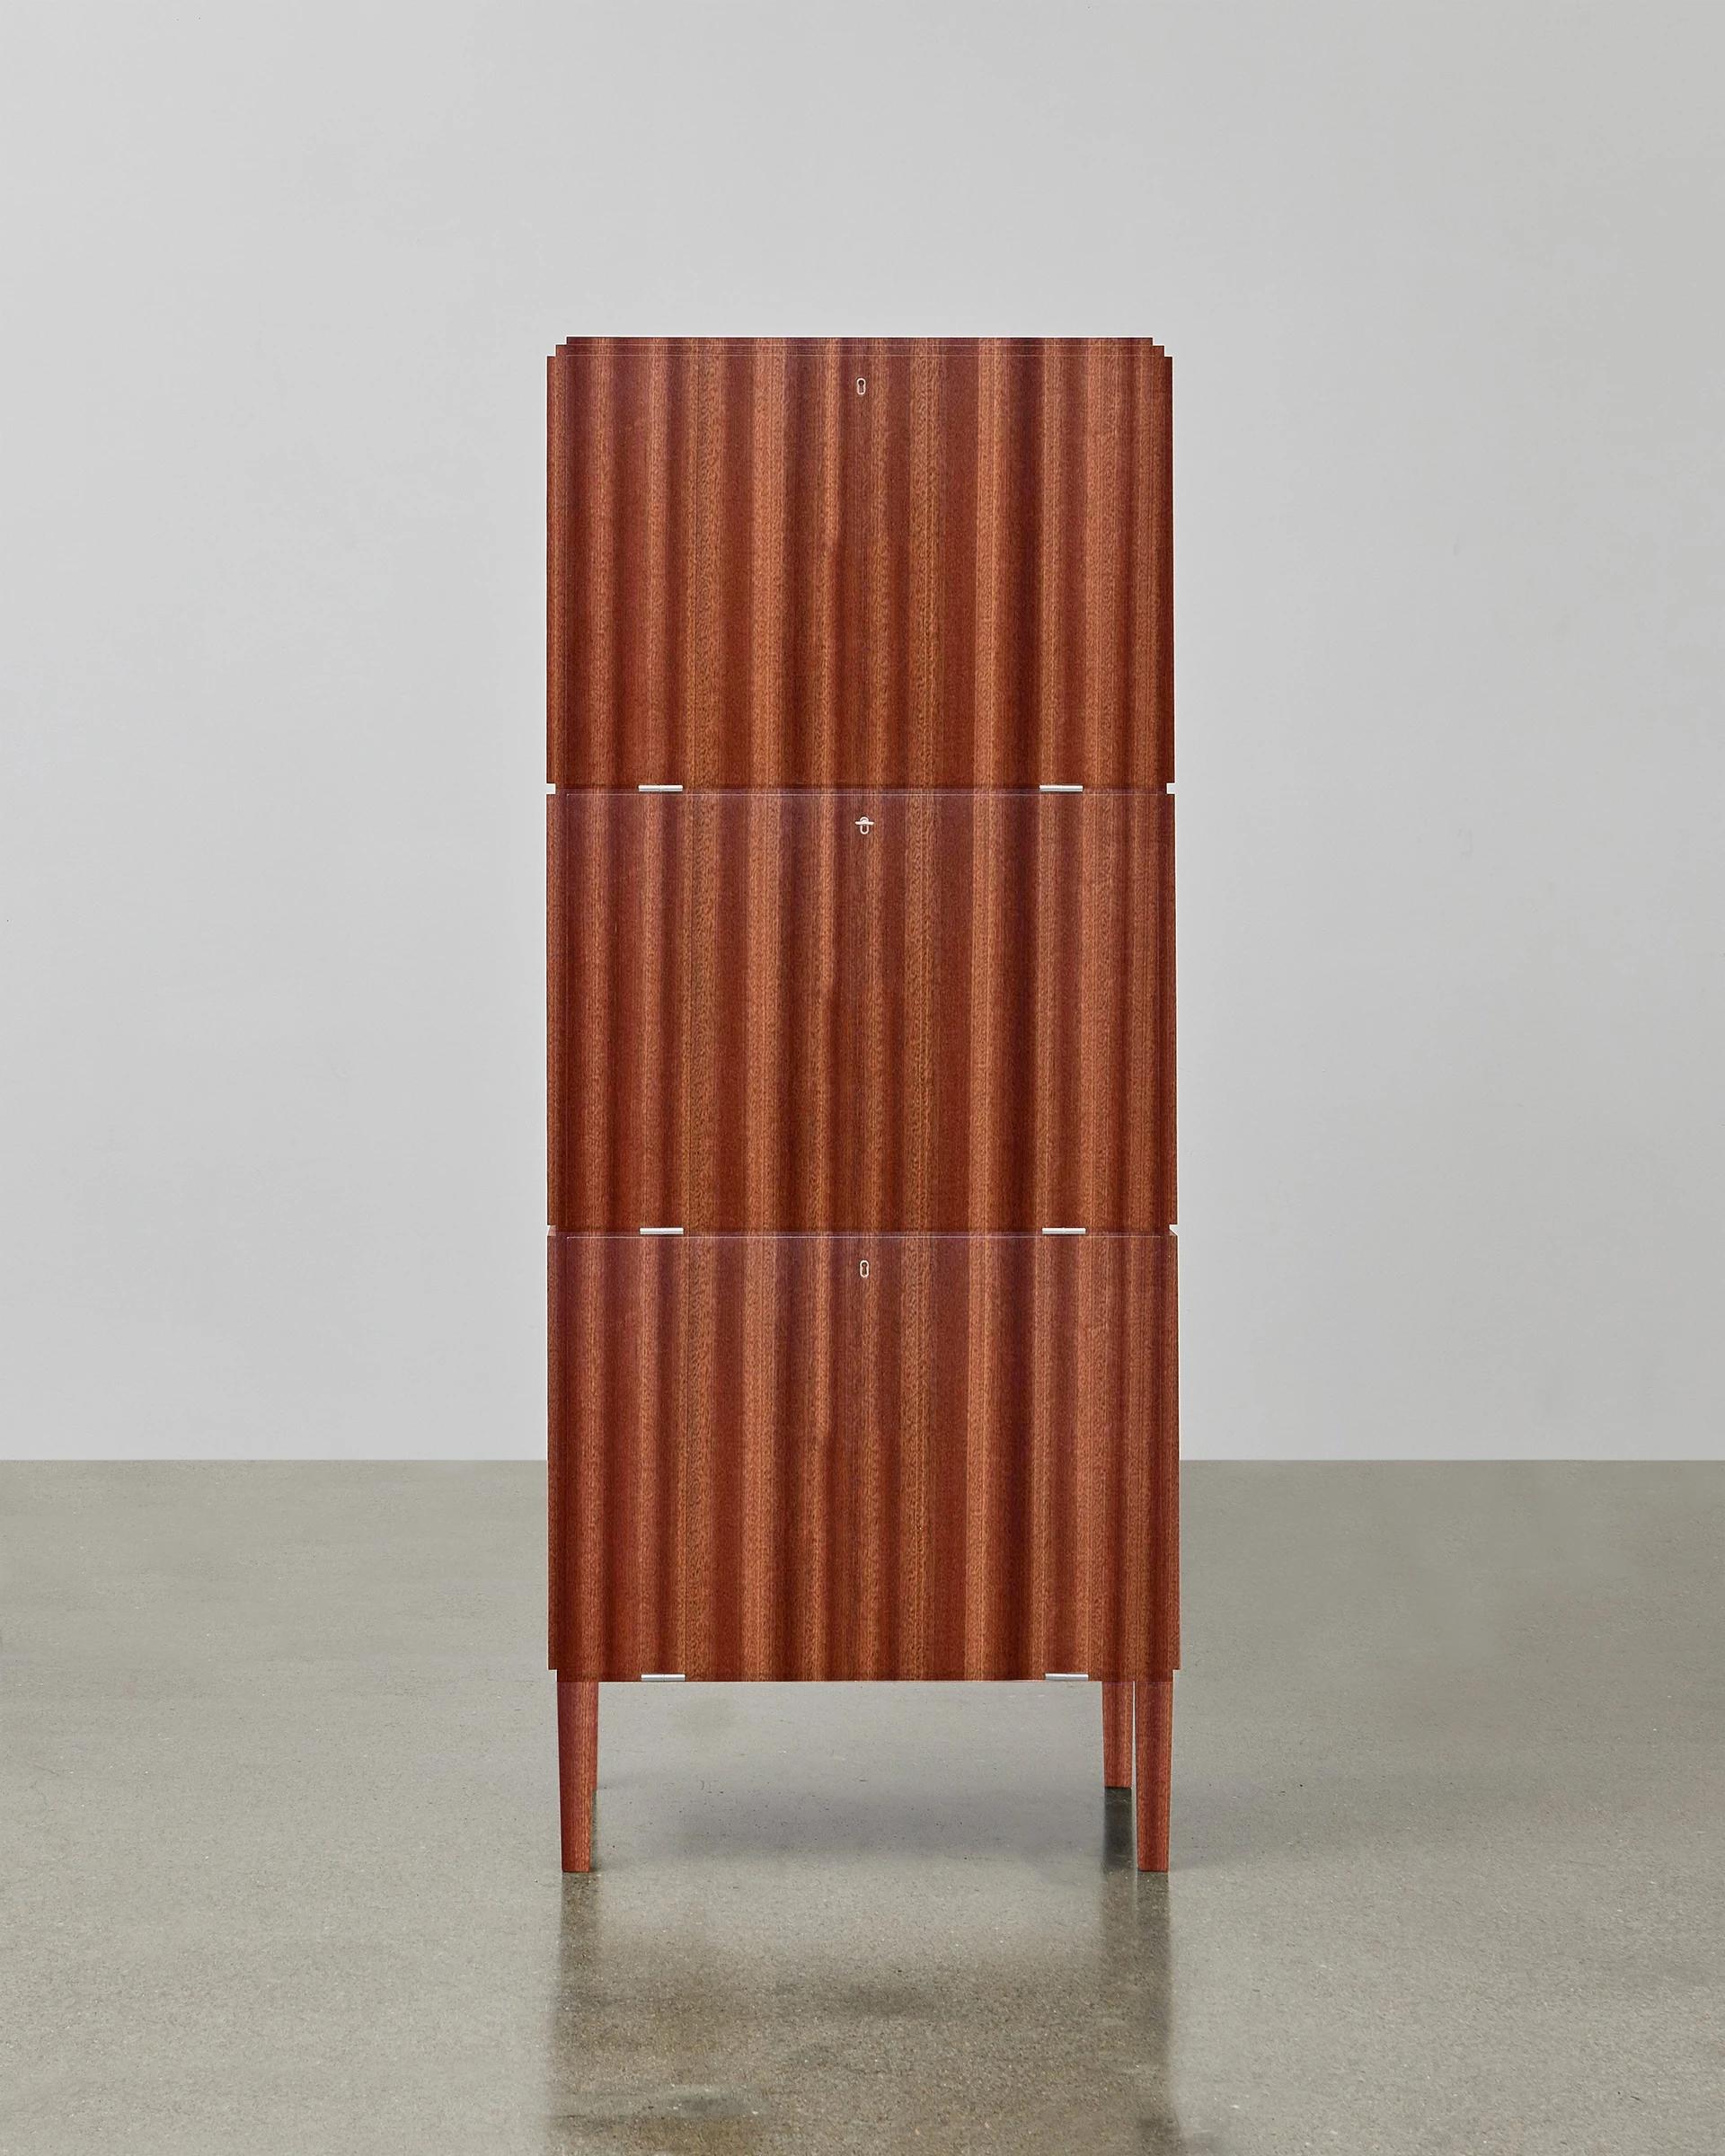 Constructed of clean lines in luxurious wood, the PH cabinet is the perfect place to display precious mementoes. The PH cabinet also features a highly practical element of three concealed storage compartments.

As with all PH Furniture, the PH